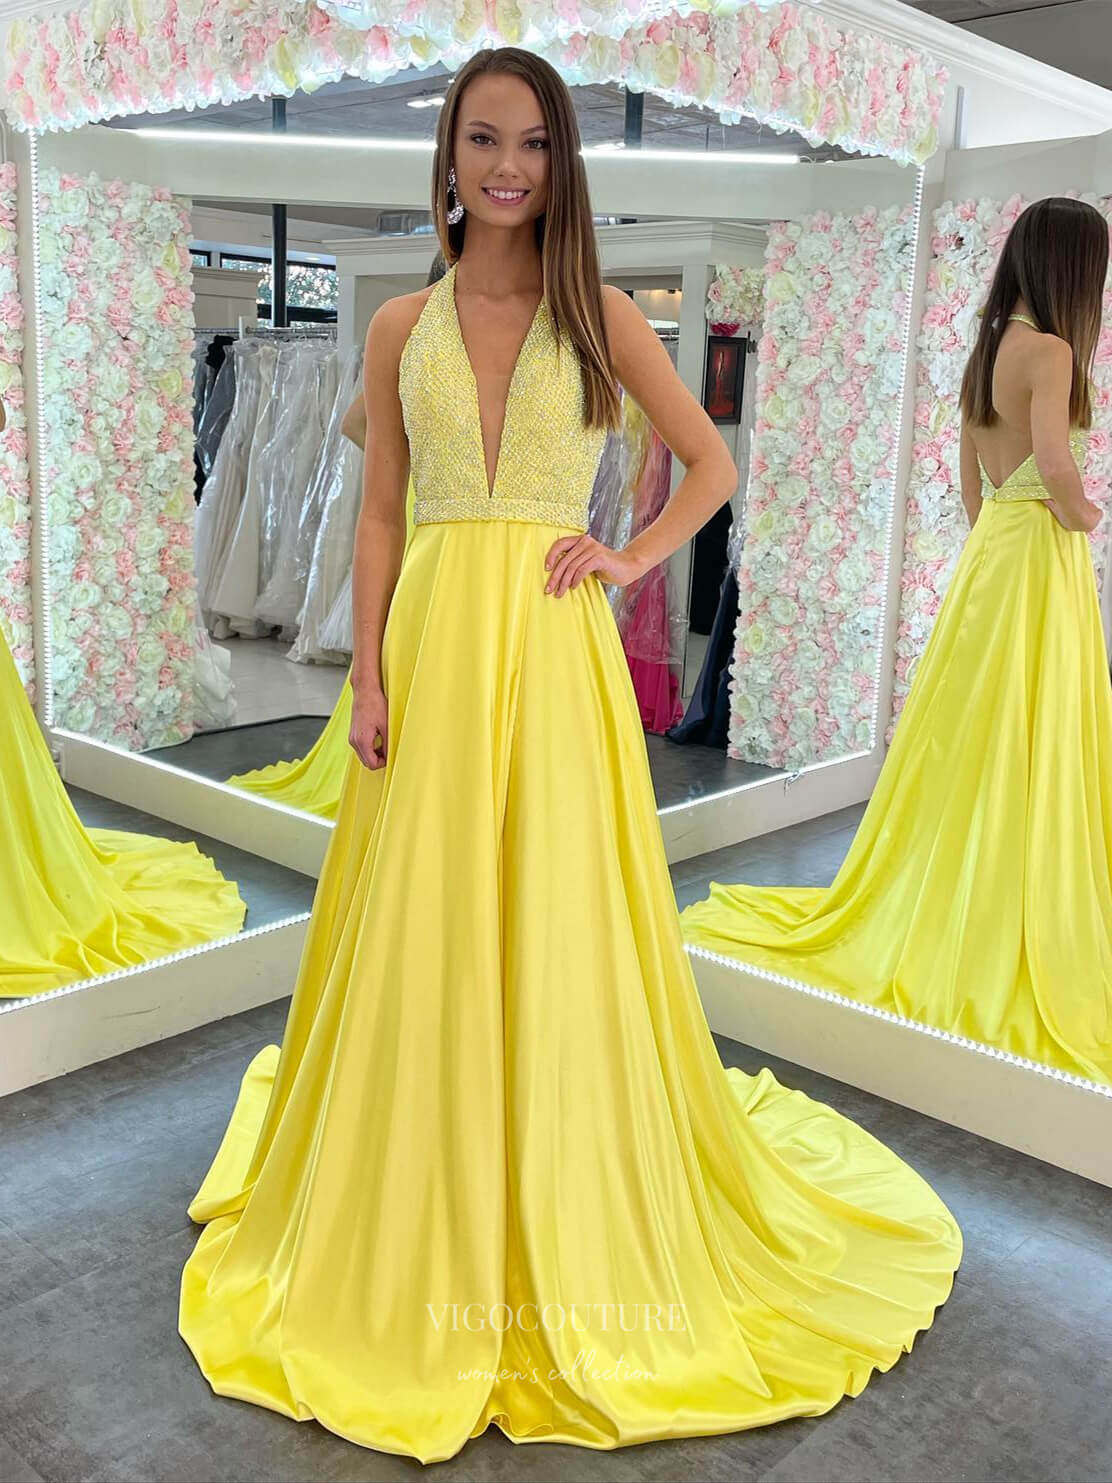 Yellow Smooth Satin Plunging V-Neck Prom Dresses Beaded Bodice Open Back 24145-Prom Dresses-vigocouture-Yellow-Custom Size-vigocouture